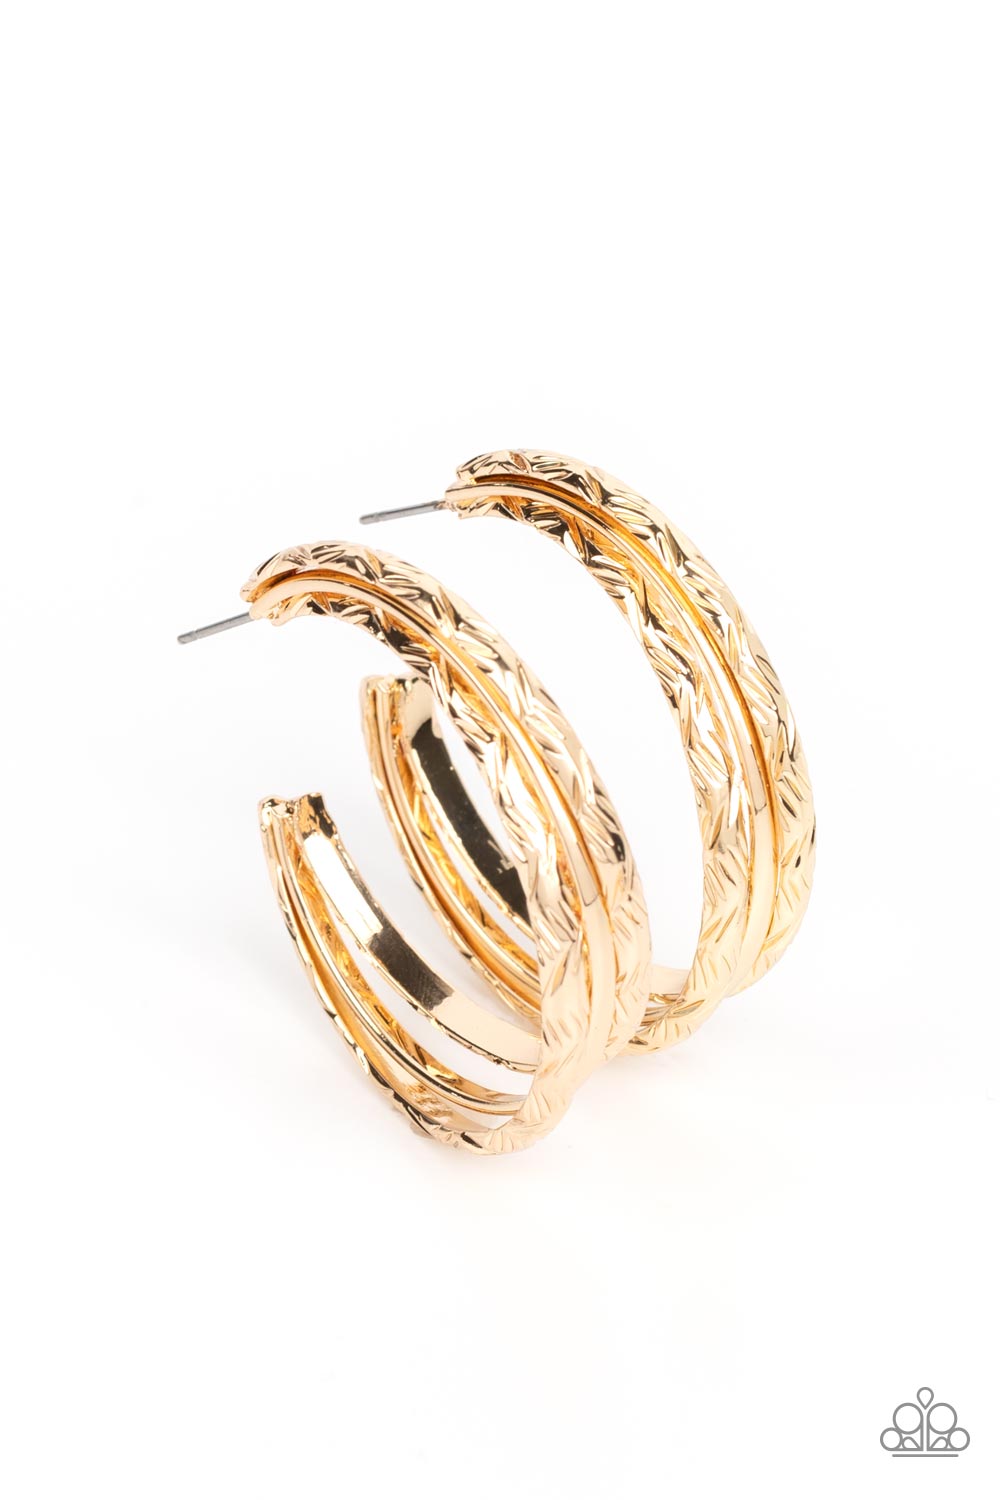 Paparazzi Accessories - CONTOUR de Force - Gold Hoop Earrings stamped in zigzagging textures, two textured gold bars flank a smooth gold bar as they curve into a layered hoop. Earring attaches to a standard post fitting. Hoop measures approximately 1 3/4" in diameter.  Sold as one pair of hoop earrings.